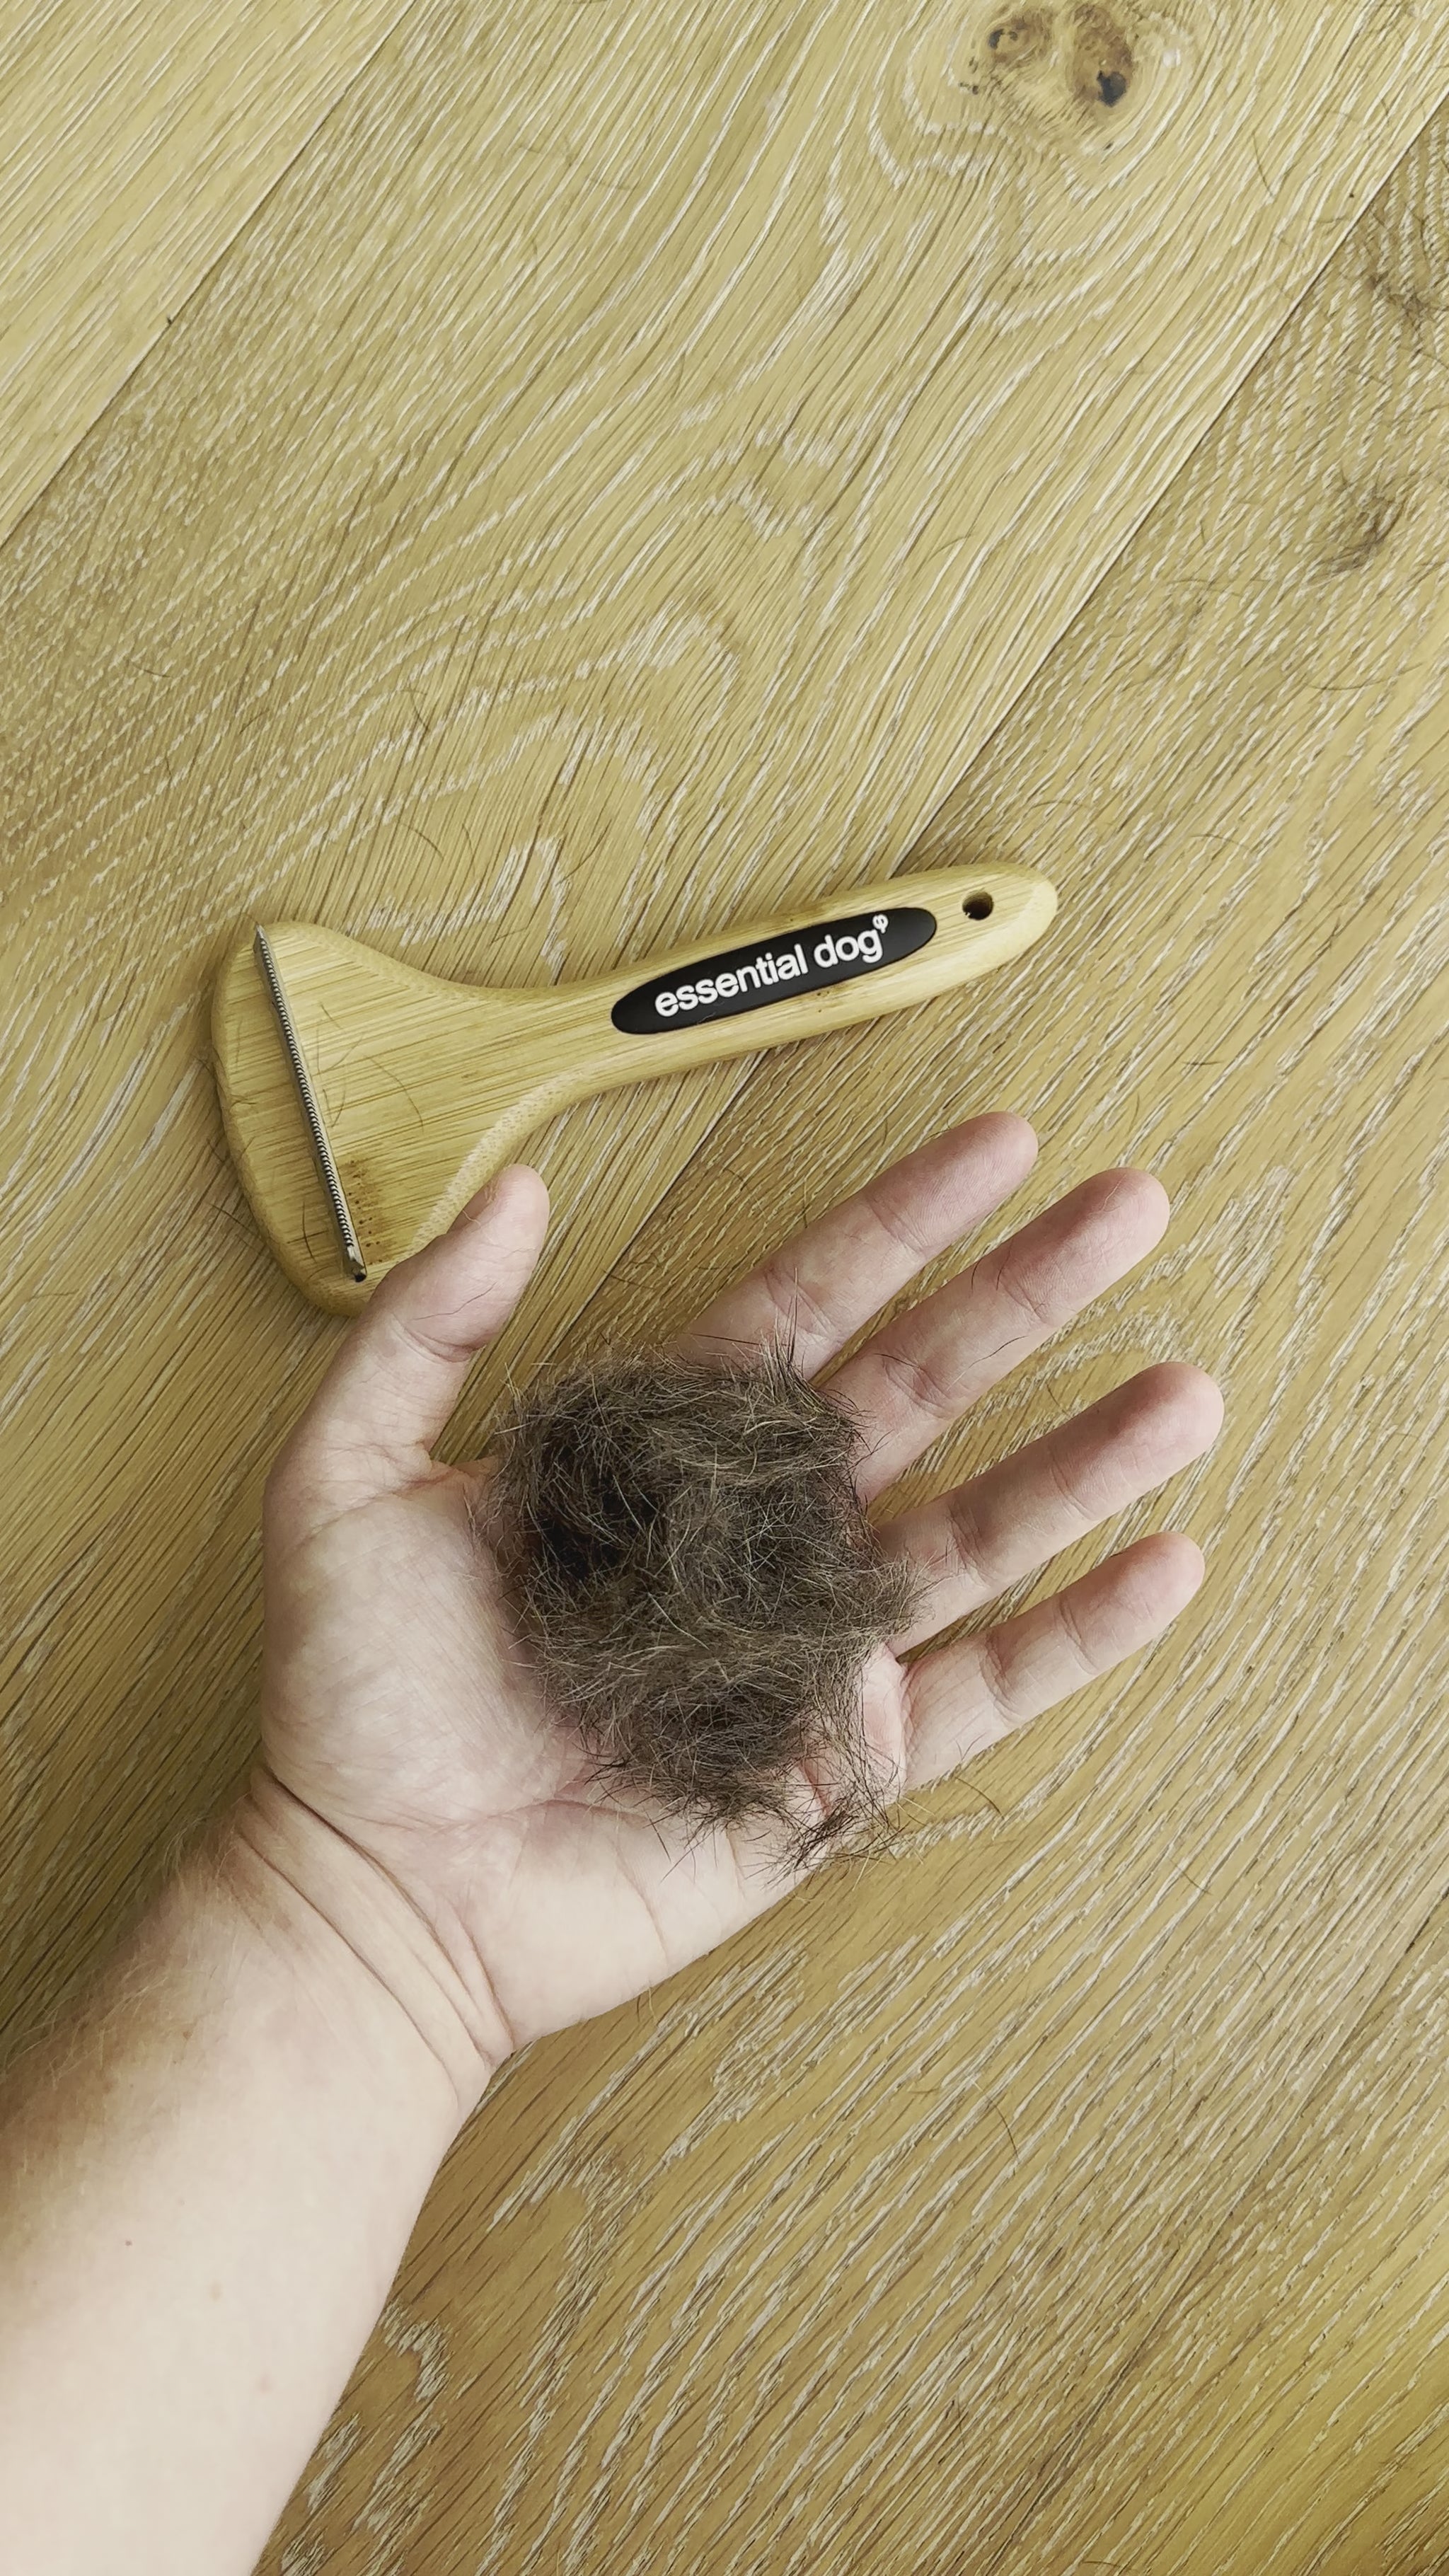 Natural bamboo deshedding brush on wooden floor. Video zooming in on large handful of dog hair removed from using the brush